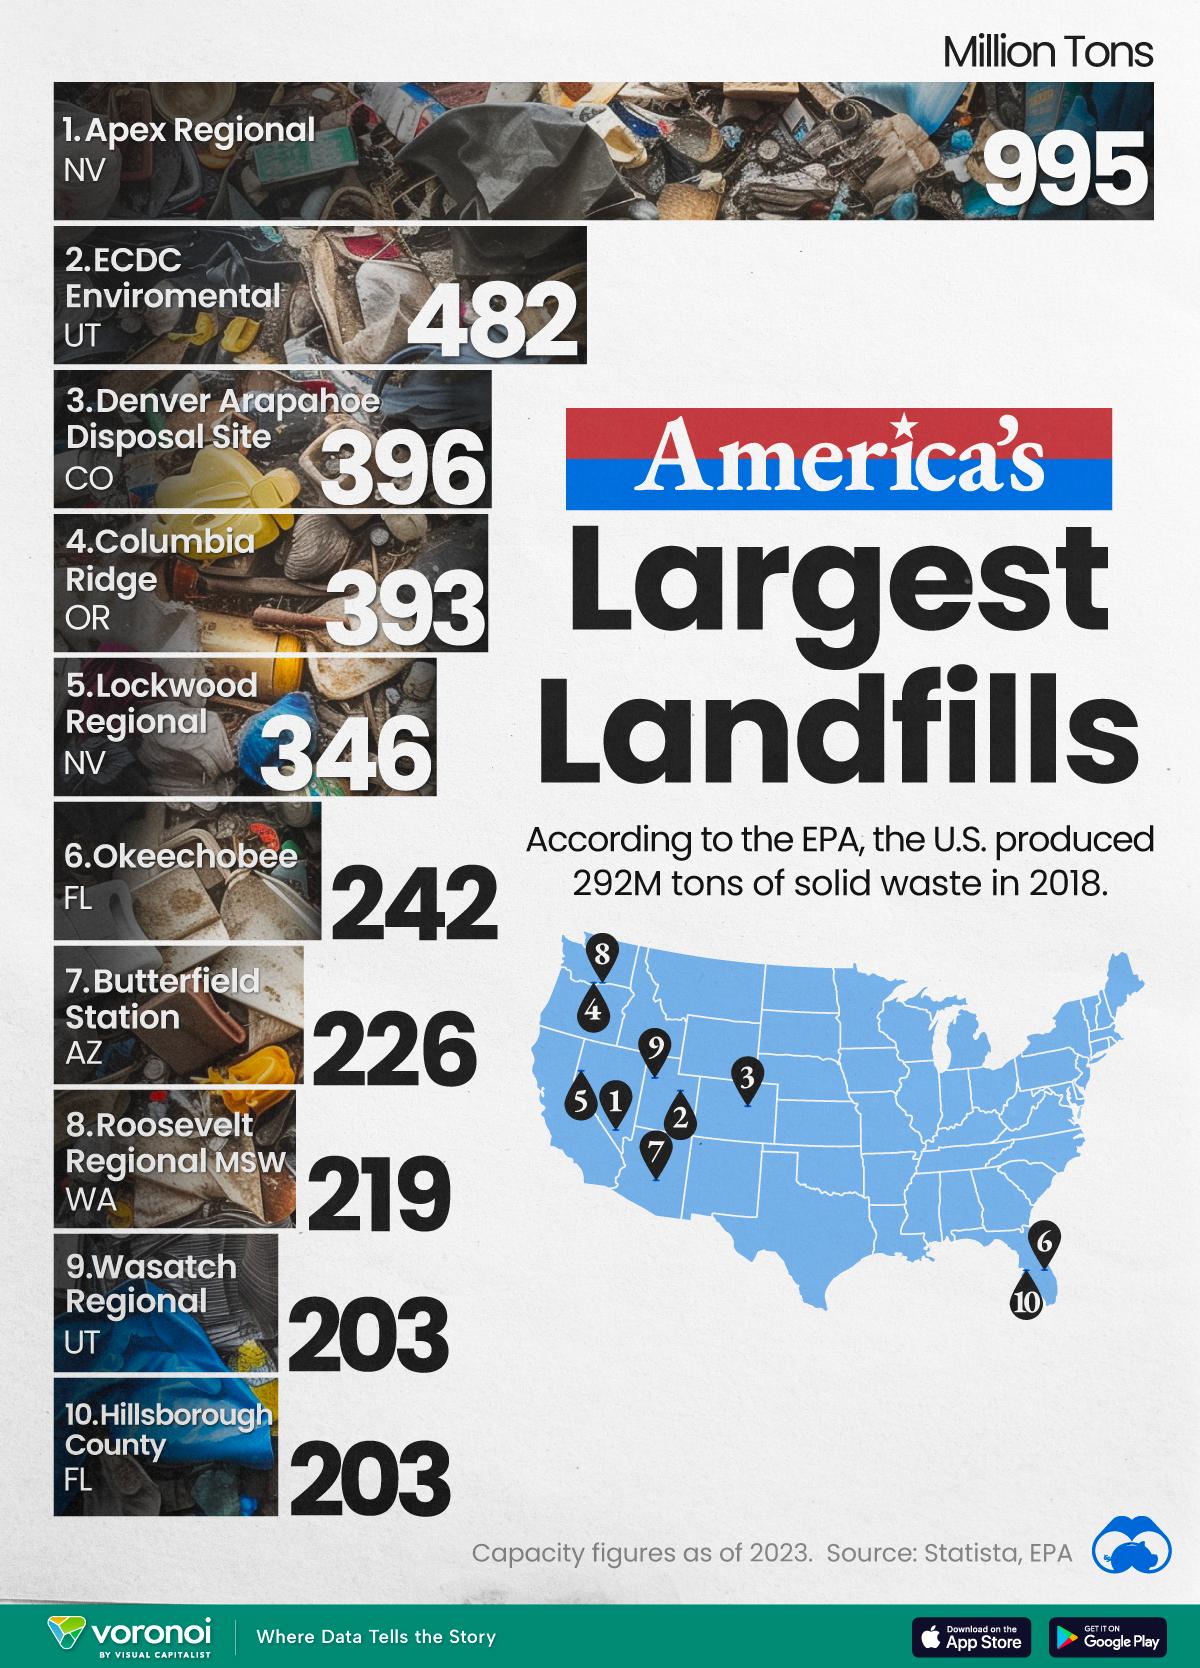 A bar chart ranking the largest landfills by capacity in the U.S.